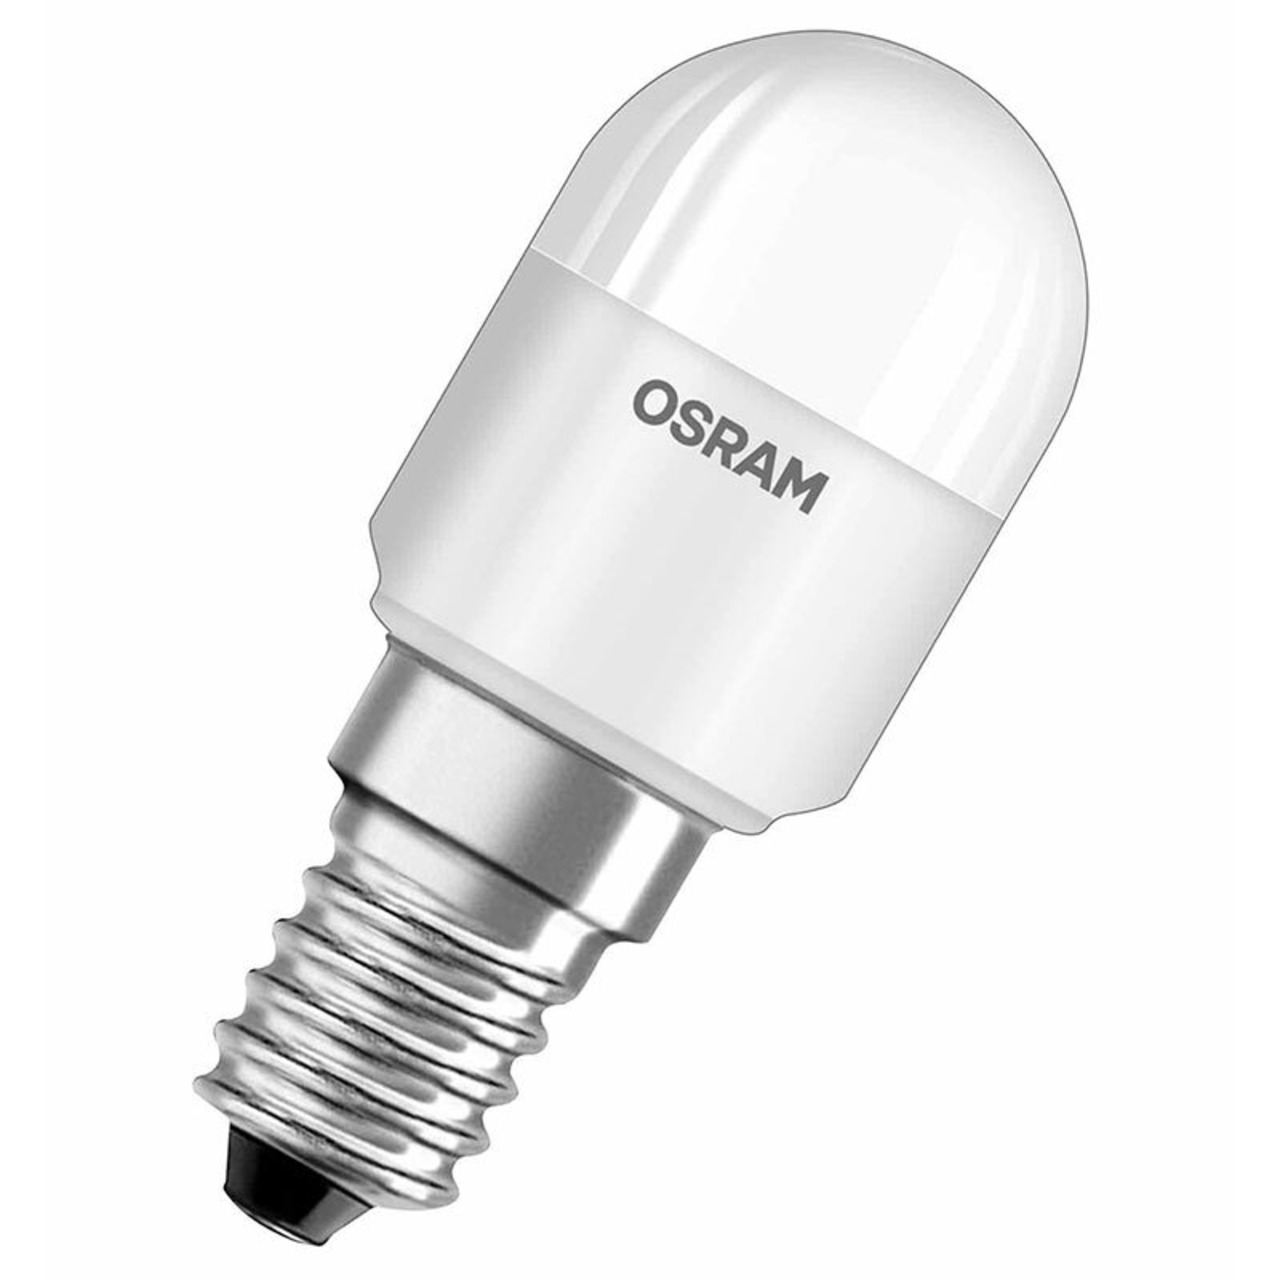 OSRAM LED STAR 2-3-W-T26-LED-Lampe E14- warmweiss unter Beleuchtung